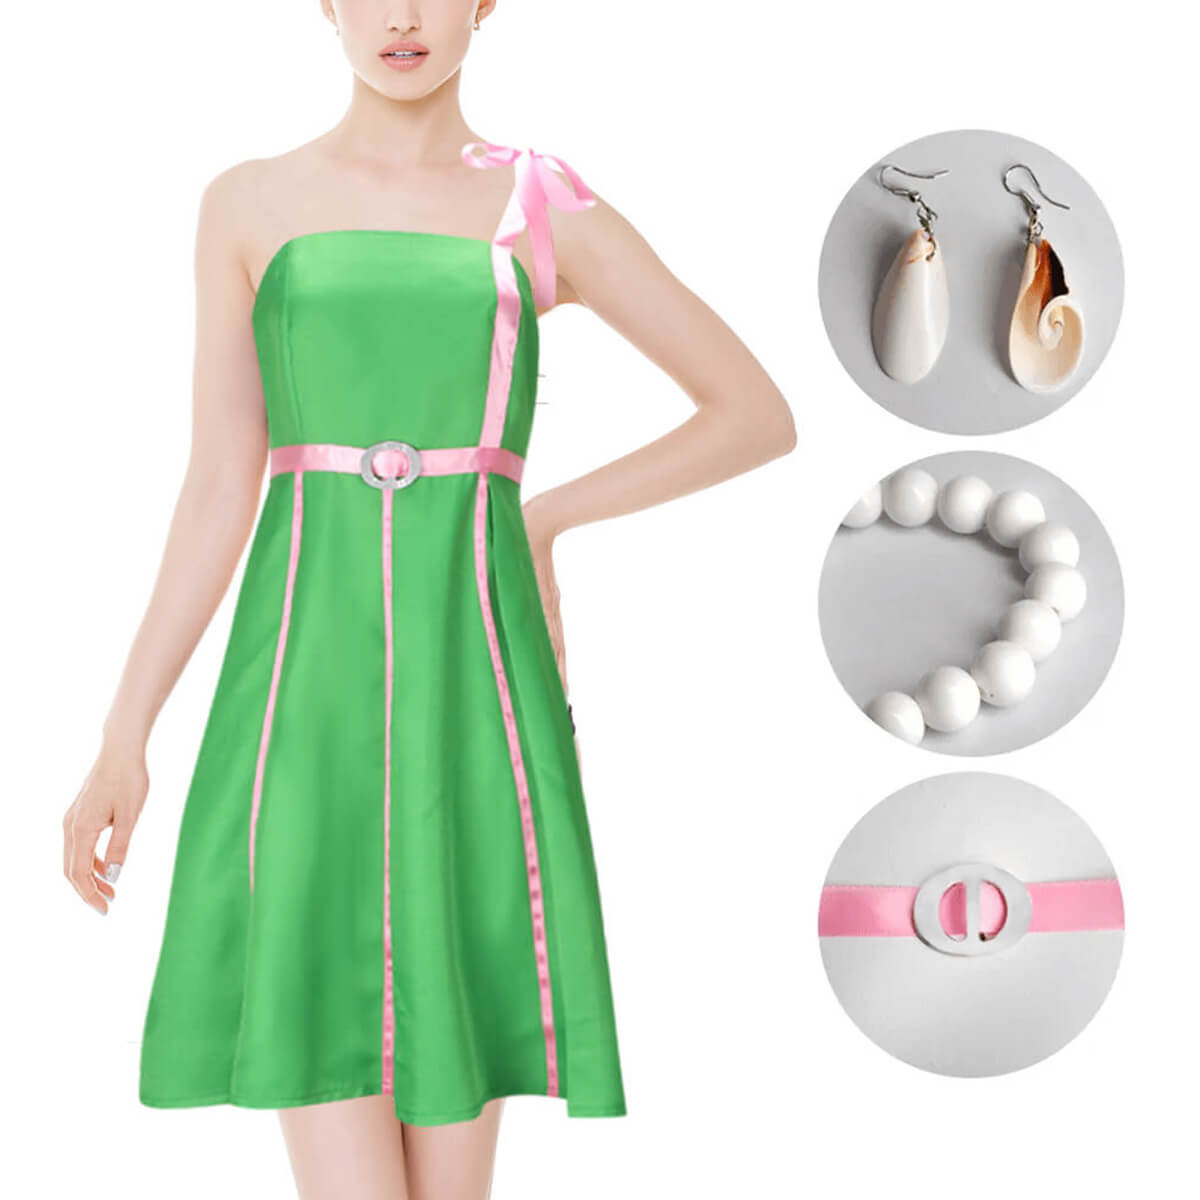 Women Barbiecore Costume Nobel Prize Physicist Green Dress with Accessories Full Set